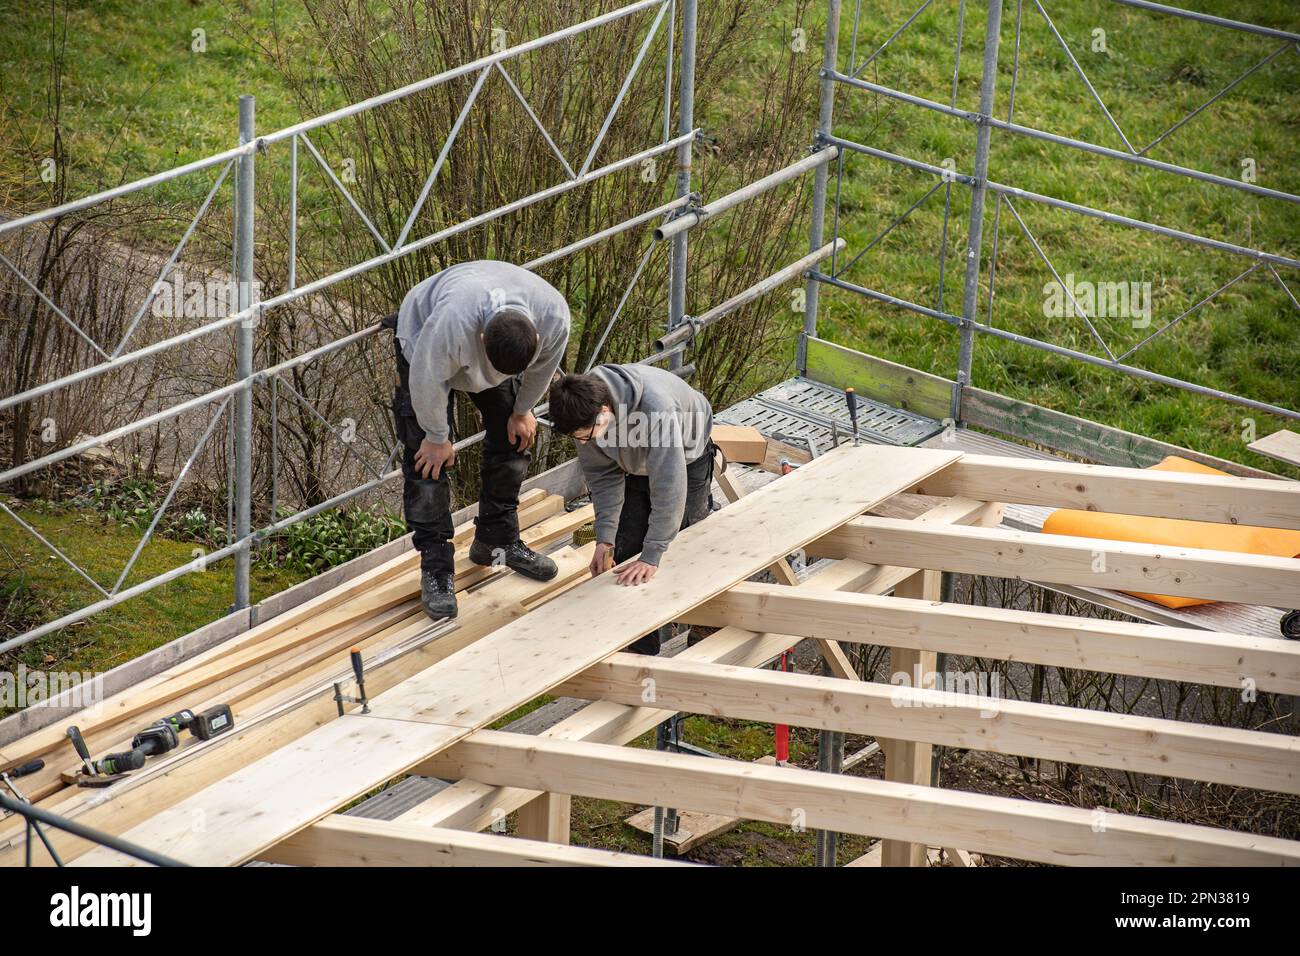 Two young carpenters building a carport. Apprentice learns from trainer. Stock Photo